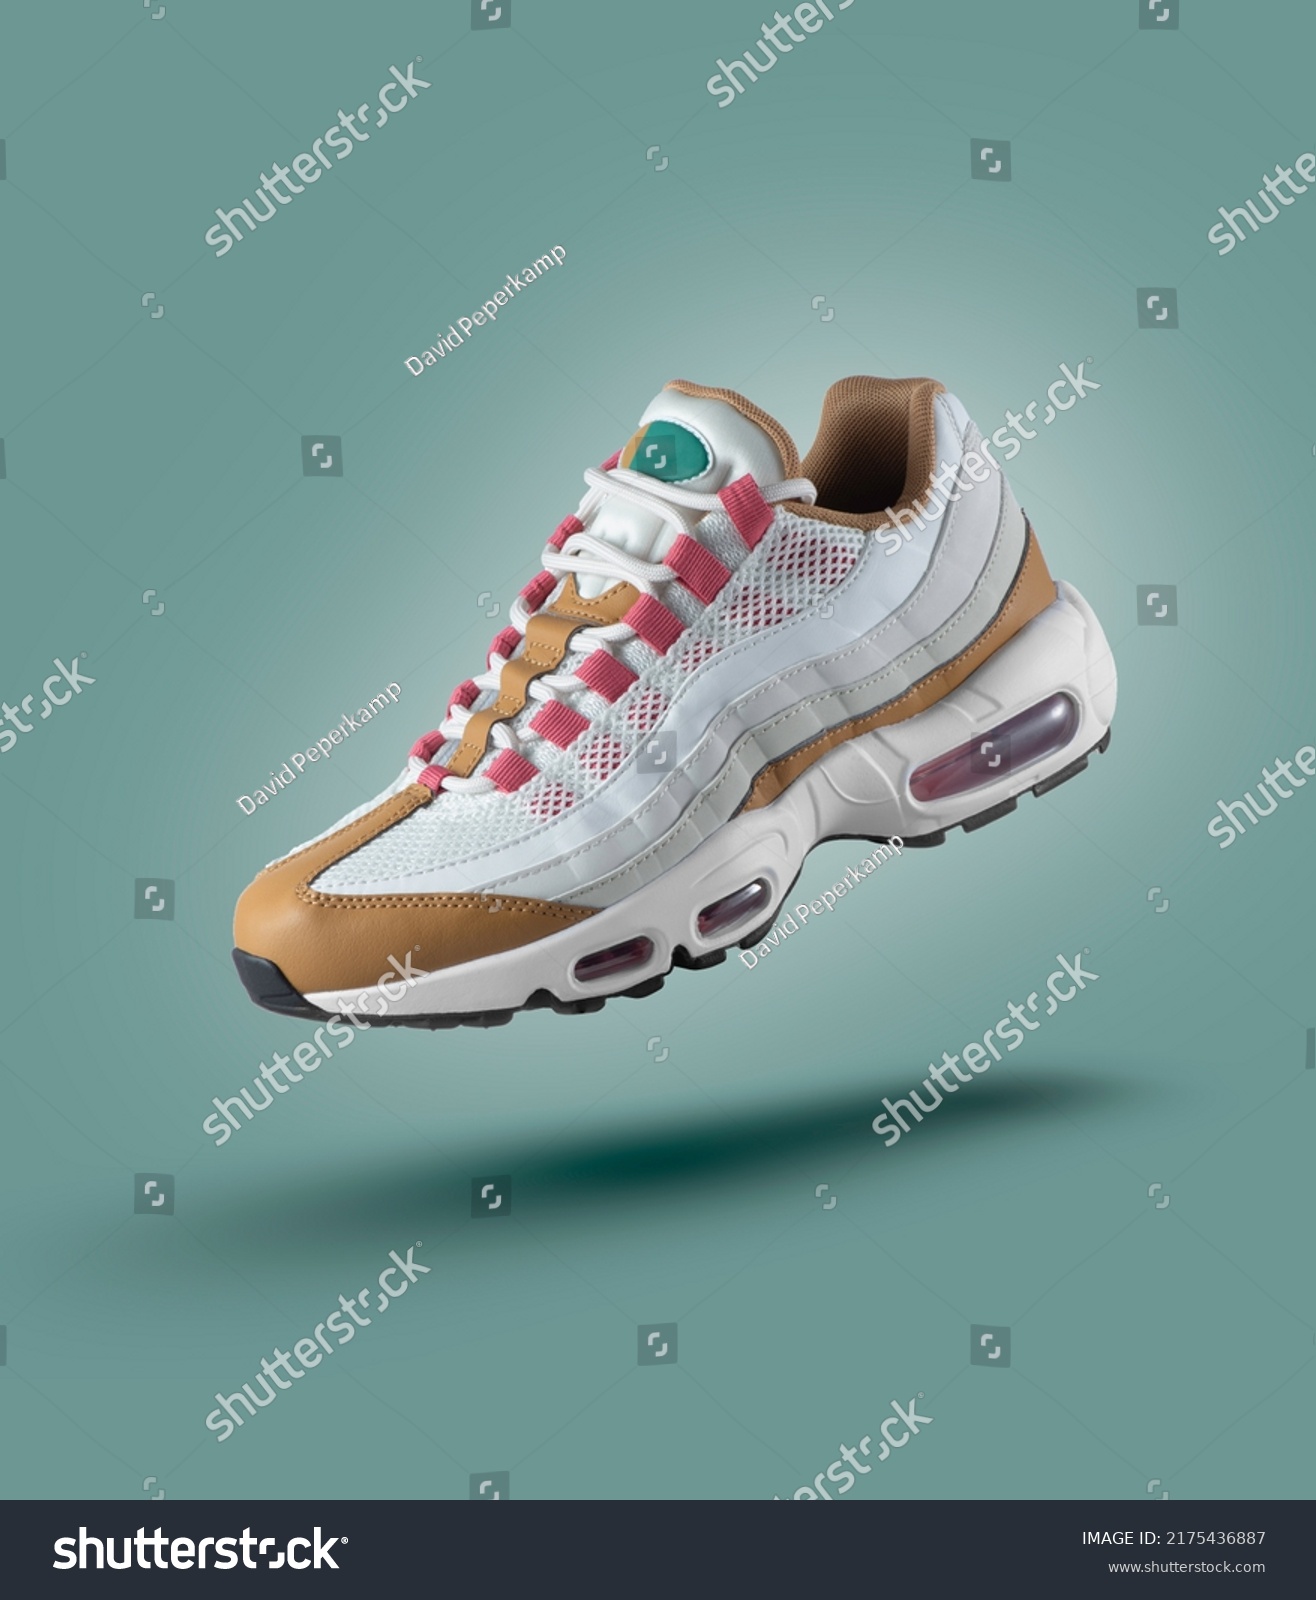 White sneaker with colored accents on a green gradient background, fashion, sport shoe,  air, sneakers, lifestyle, concept, product photo, levitation concept, street wear, trainer #2175436887